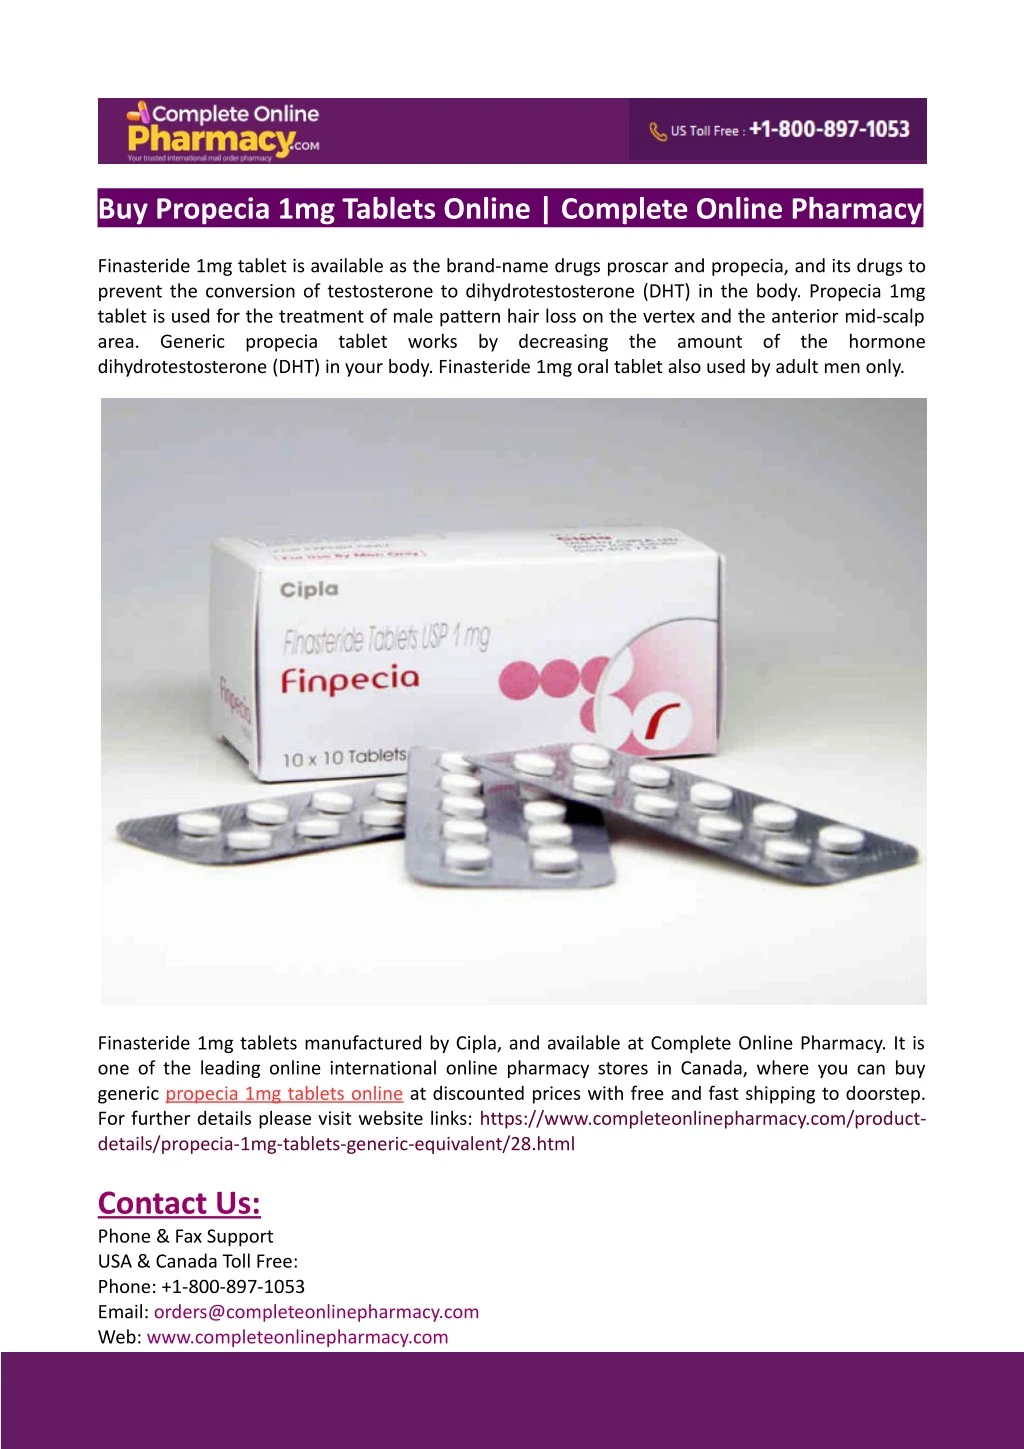 buy propecia 1mg tablets online complete online